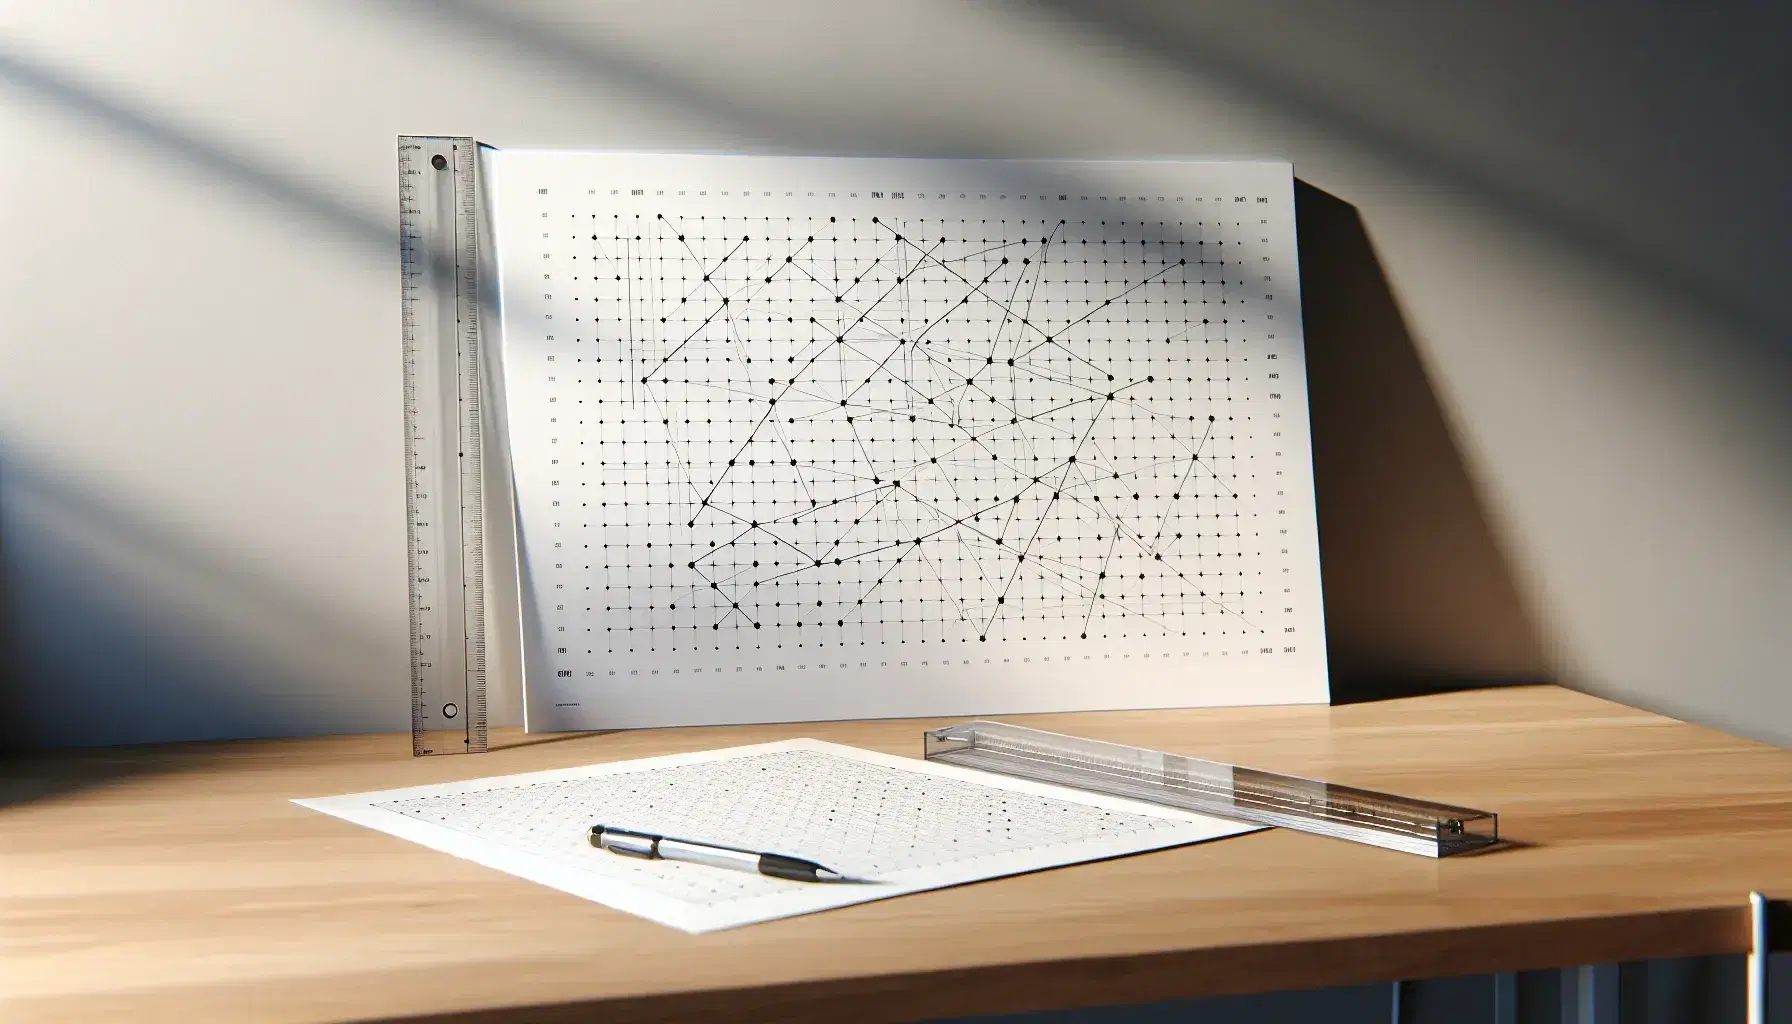 Organized desk with grid paper featuring a network of connected dots, a transparent ruler, and a mechanical pencil on a wooden surface, near a blank blackboard.